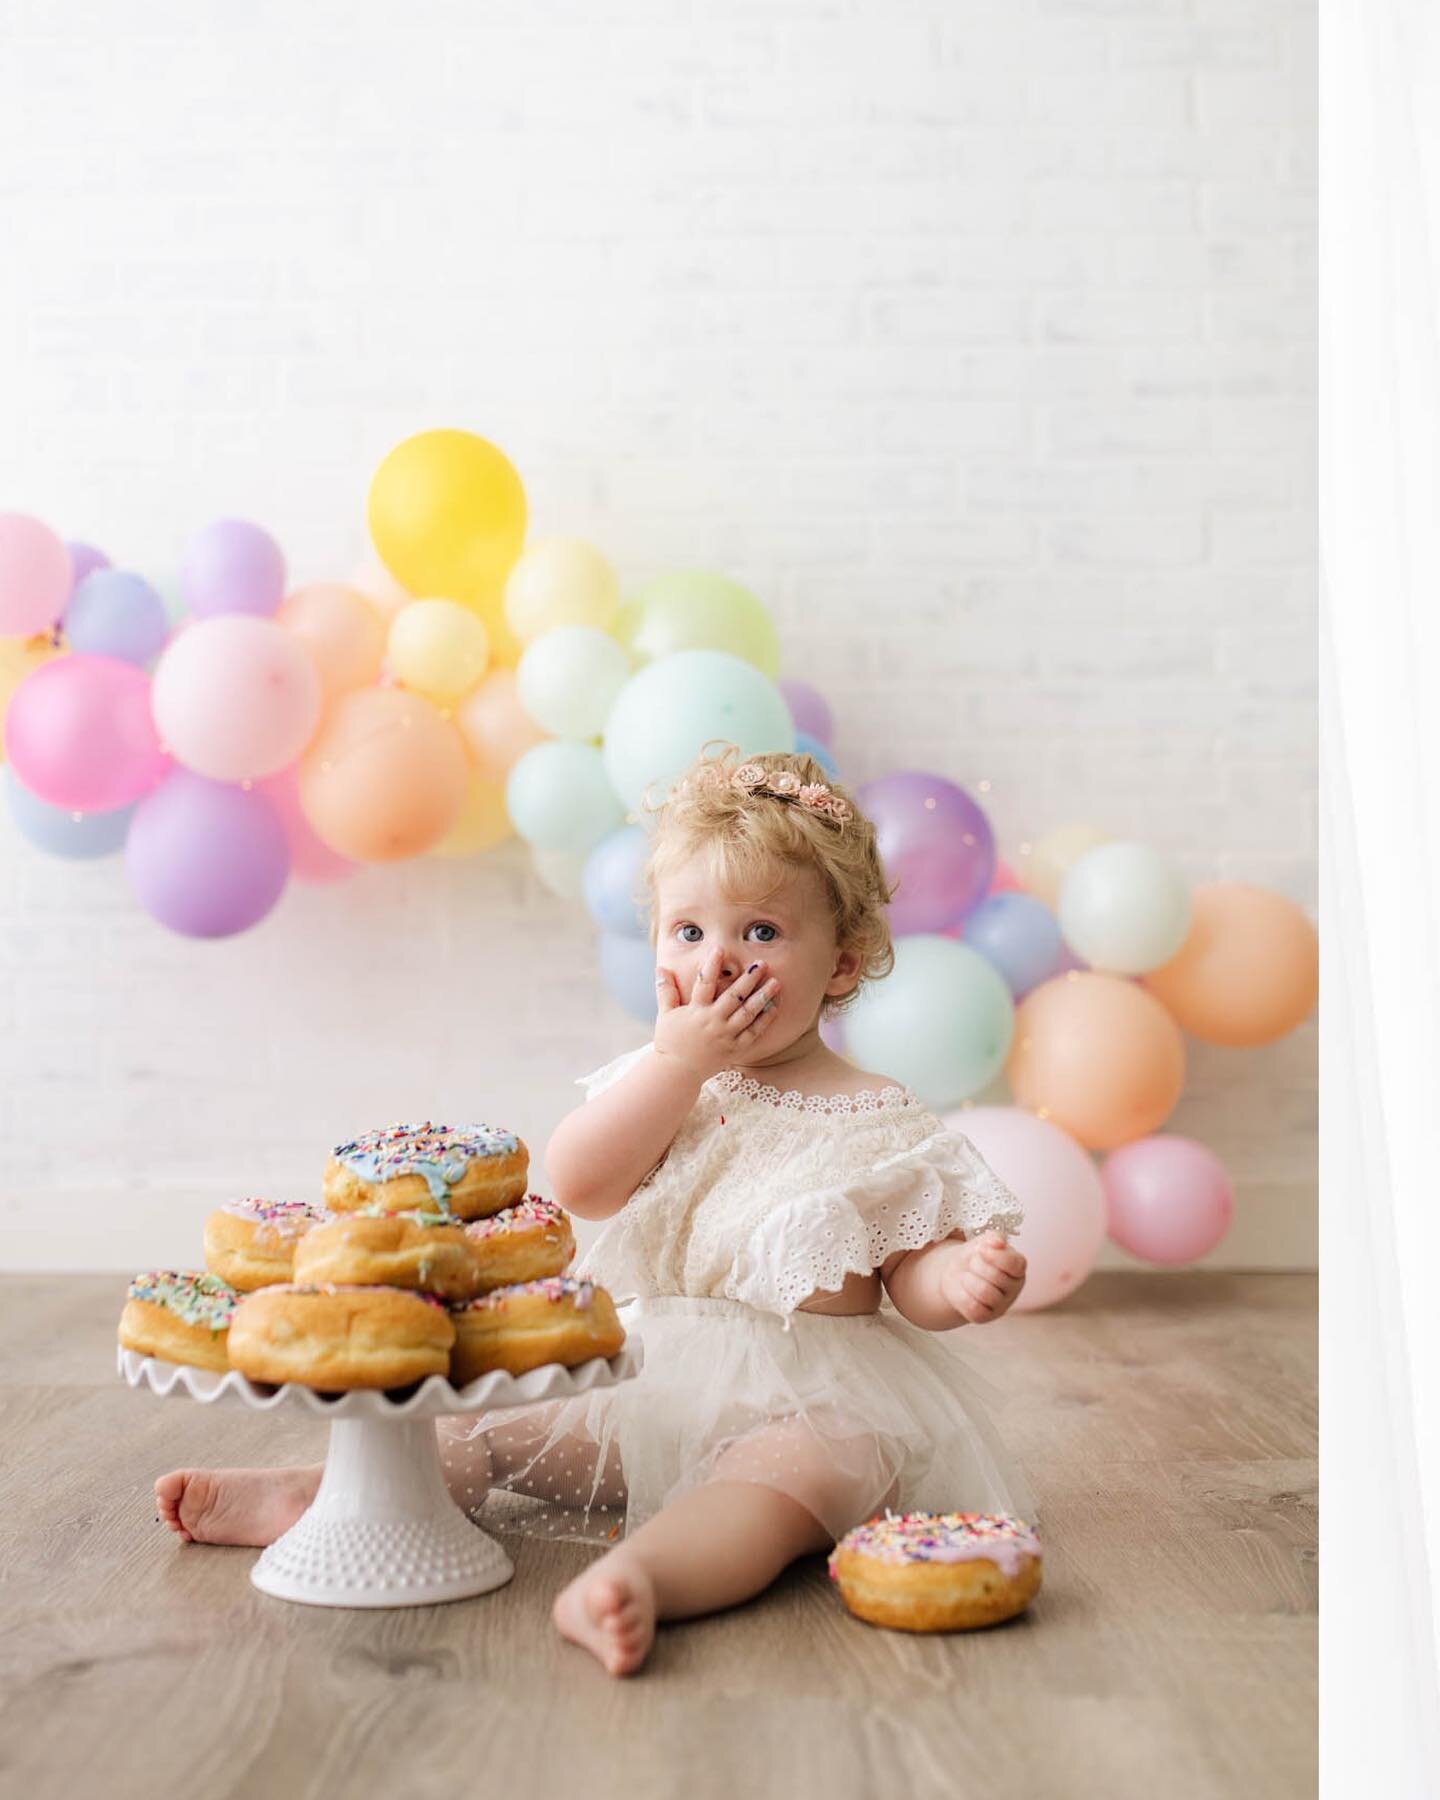 Lucy celebrated her birthday with a donut 🍩 smash!

Would you believe this angelic sweetheart was totally teething during her session?! 😢

She was a complete champ and I love how these turned out. 

Donuts from @uncleleosgeorgetown